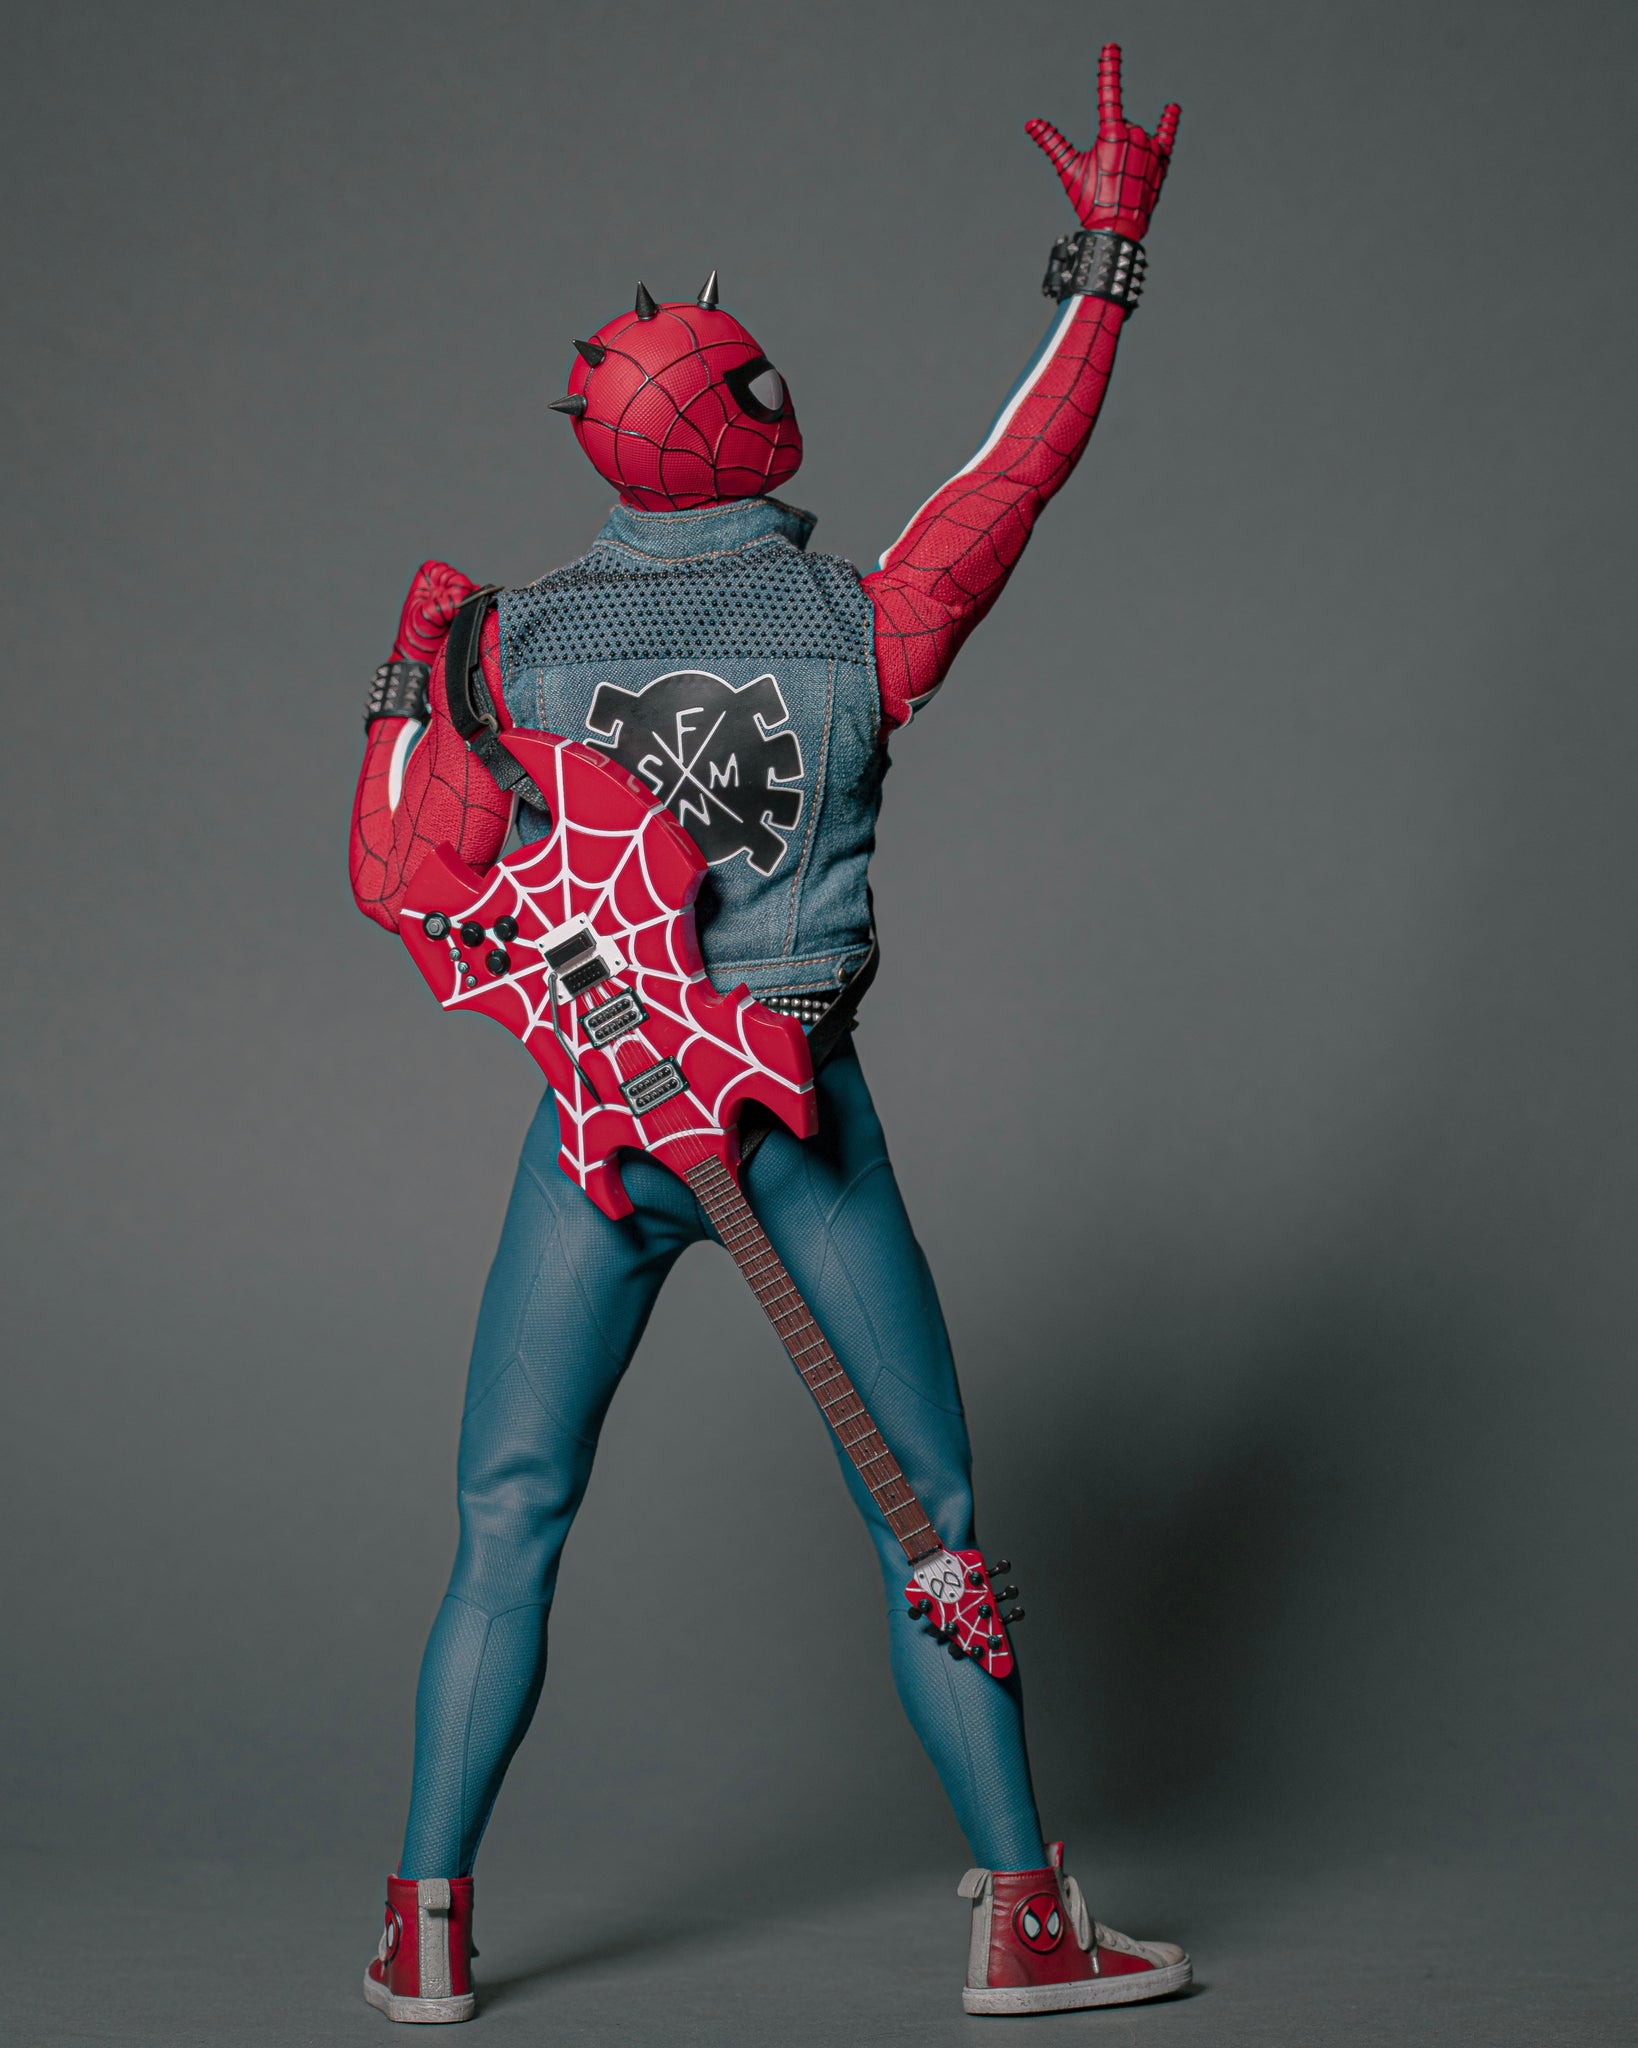 Hot Toys VGM32 Marvel Spiderman PS4 Spiderman Punk Suit 1/6 Scale